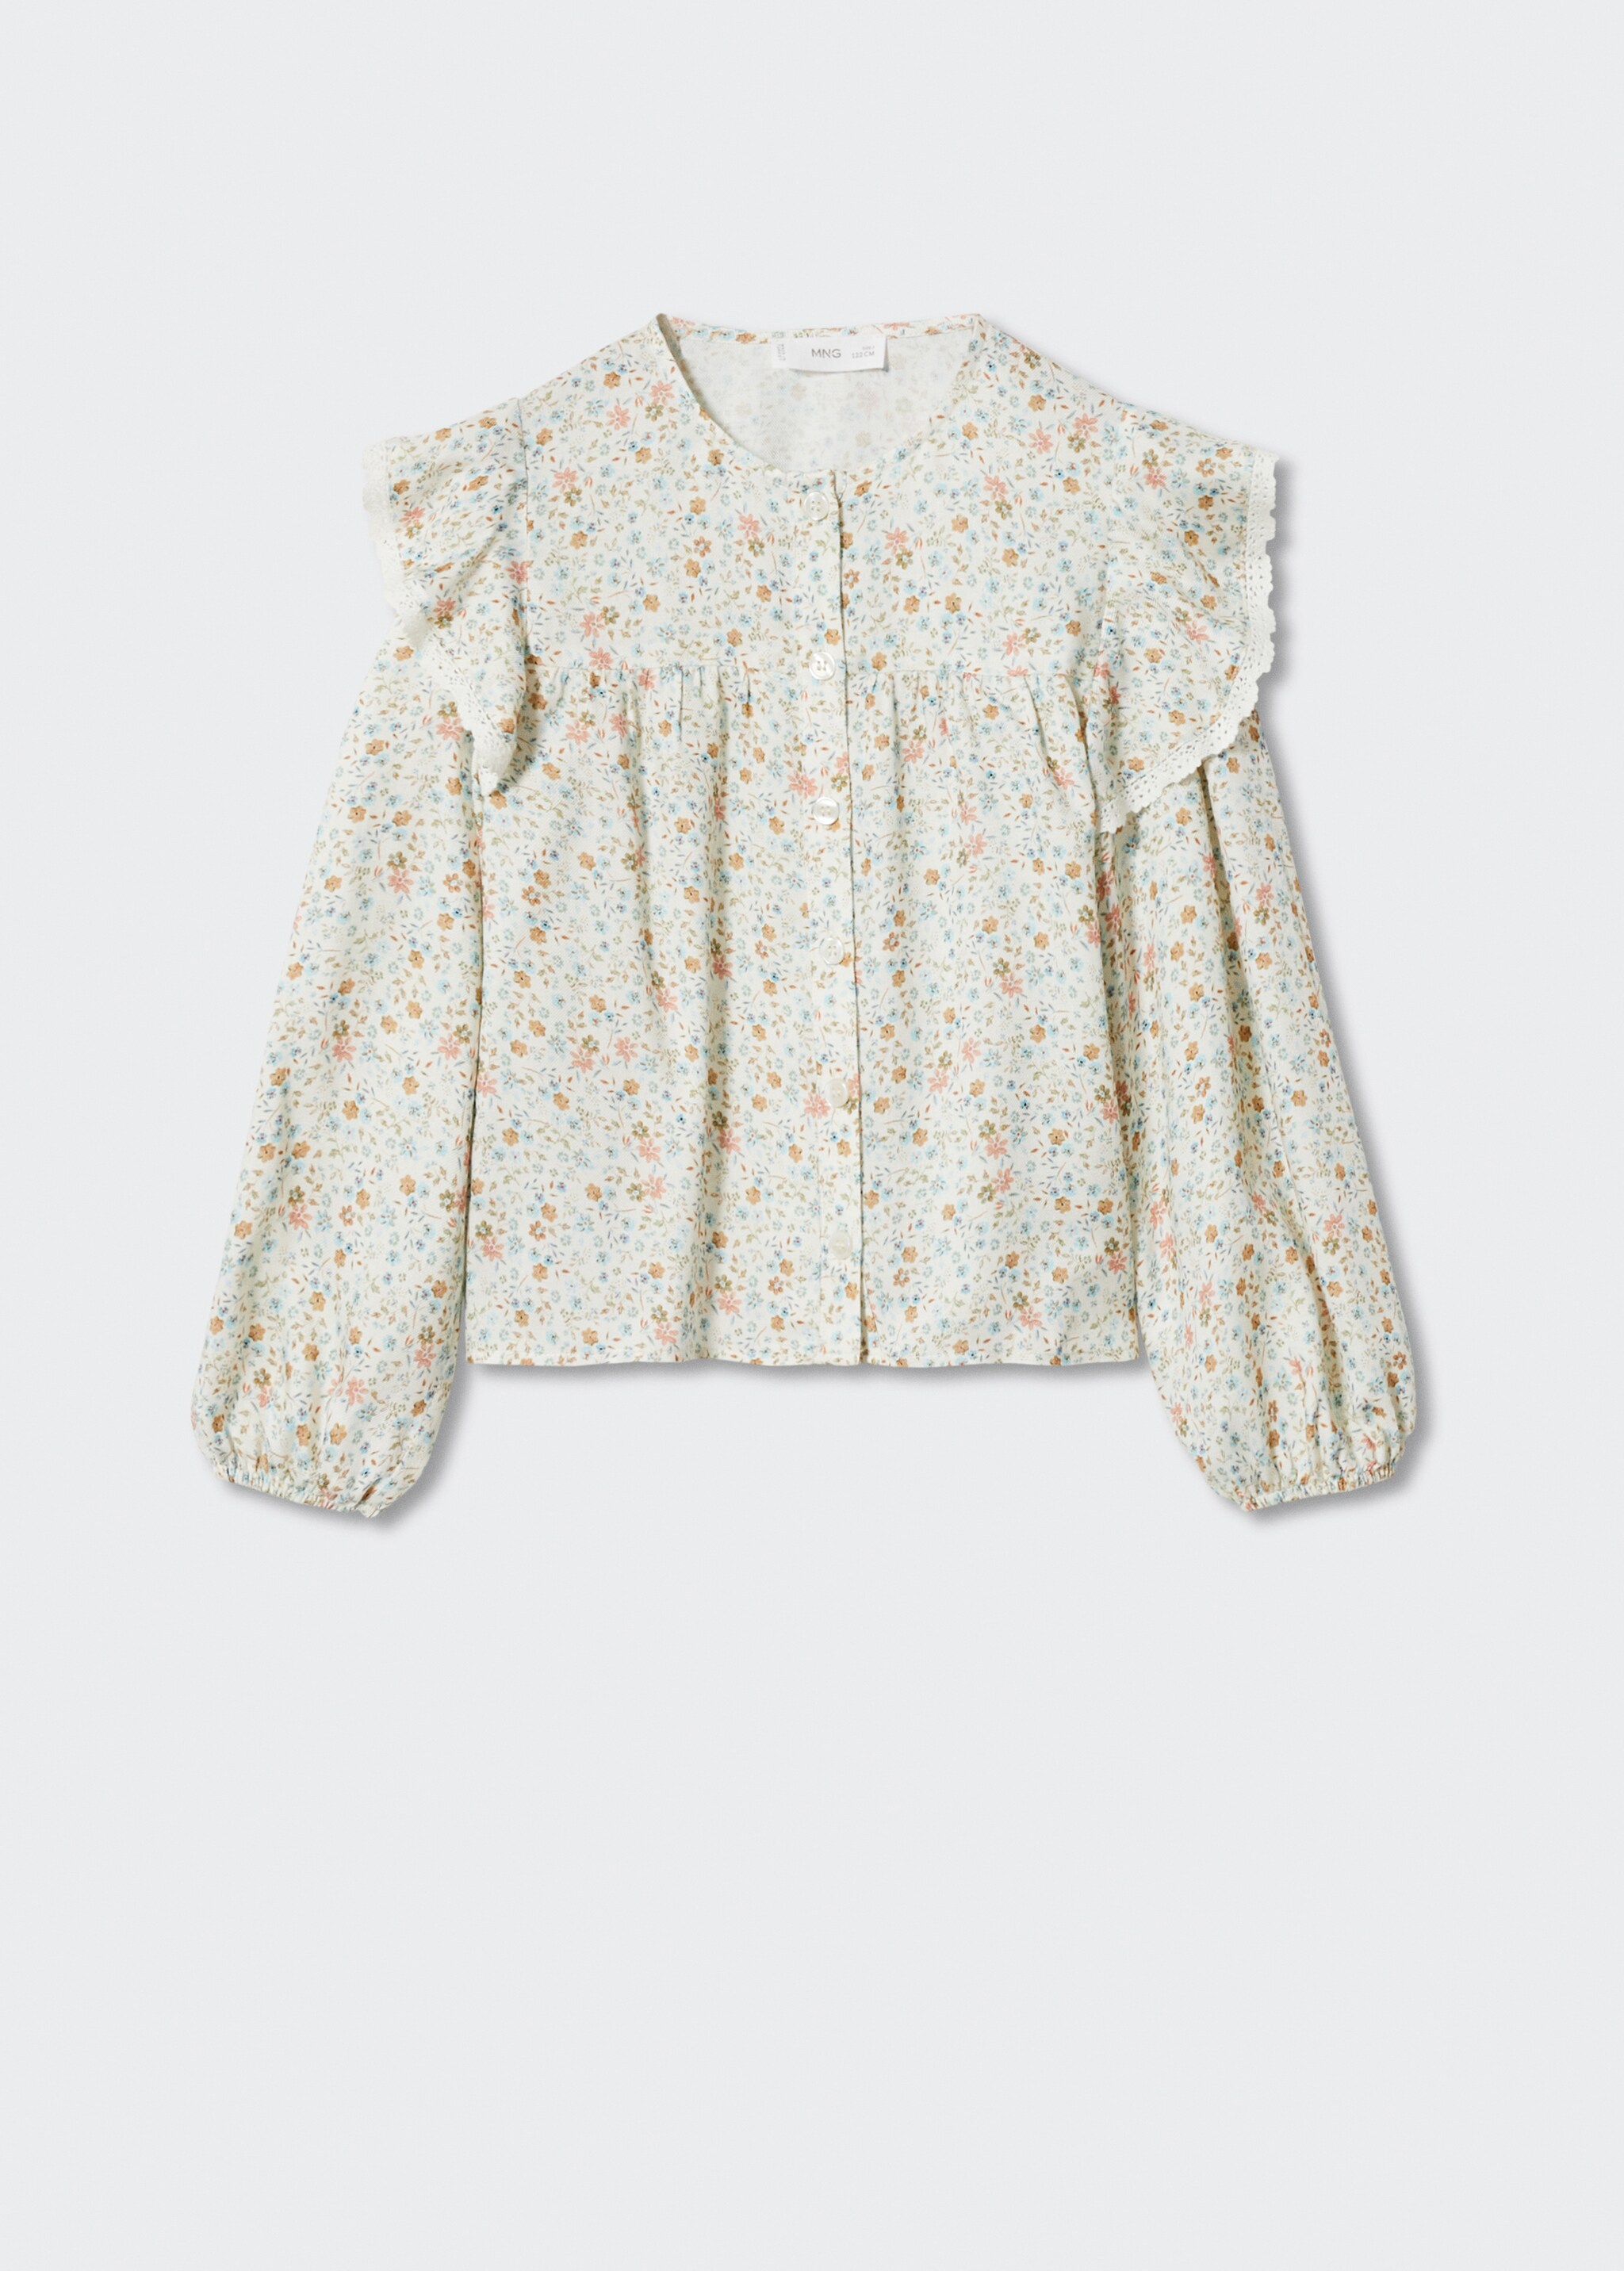 Floral print blouse - Article without model